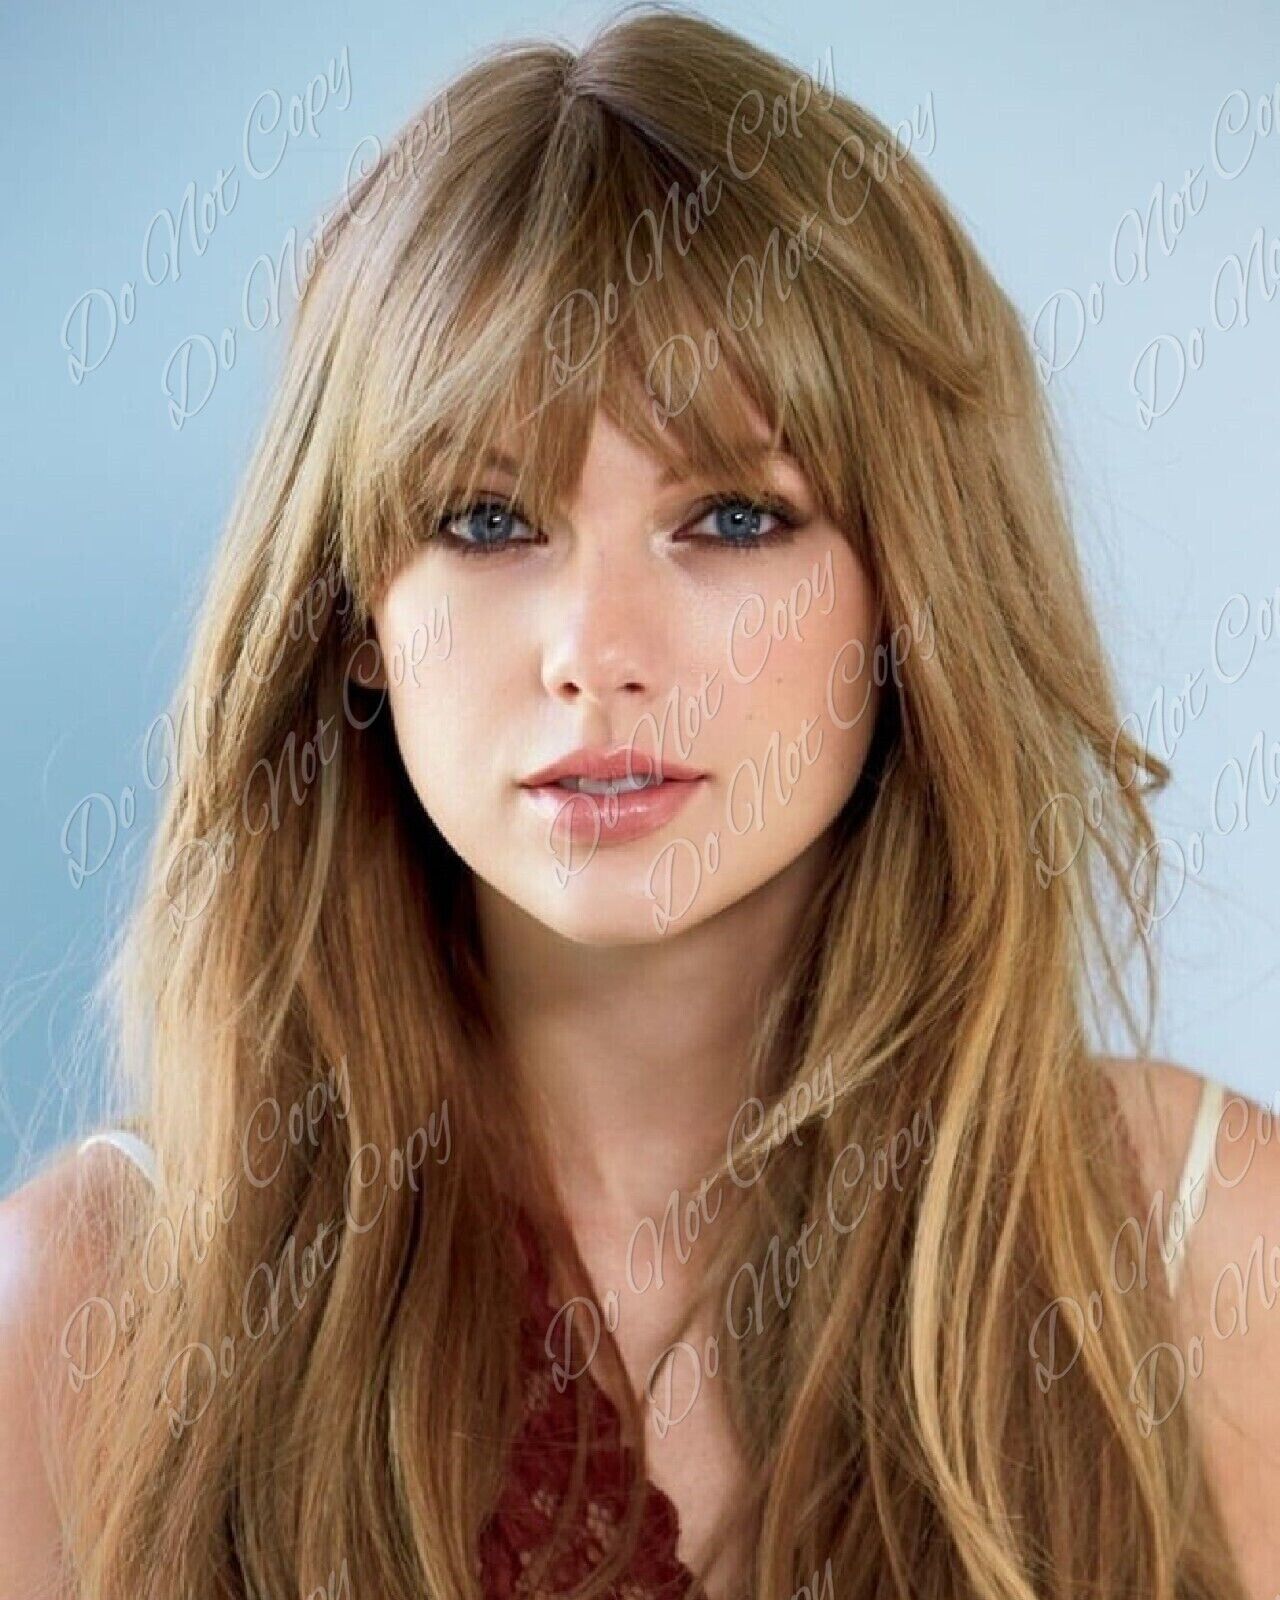 Taylor Swift Photo Sexy Celebrity Singer Hot Headshot Beautiful 4x6 or 5x7 Rp